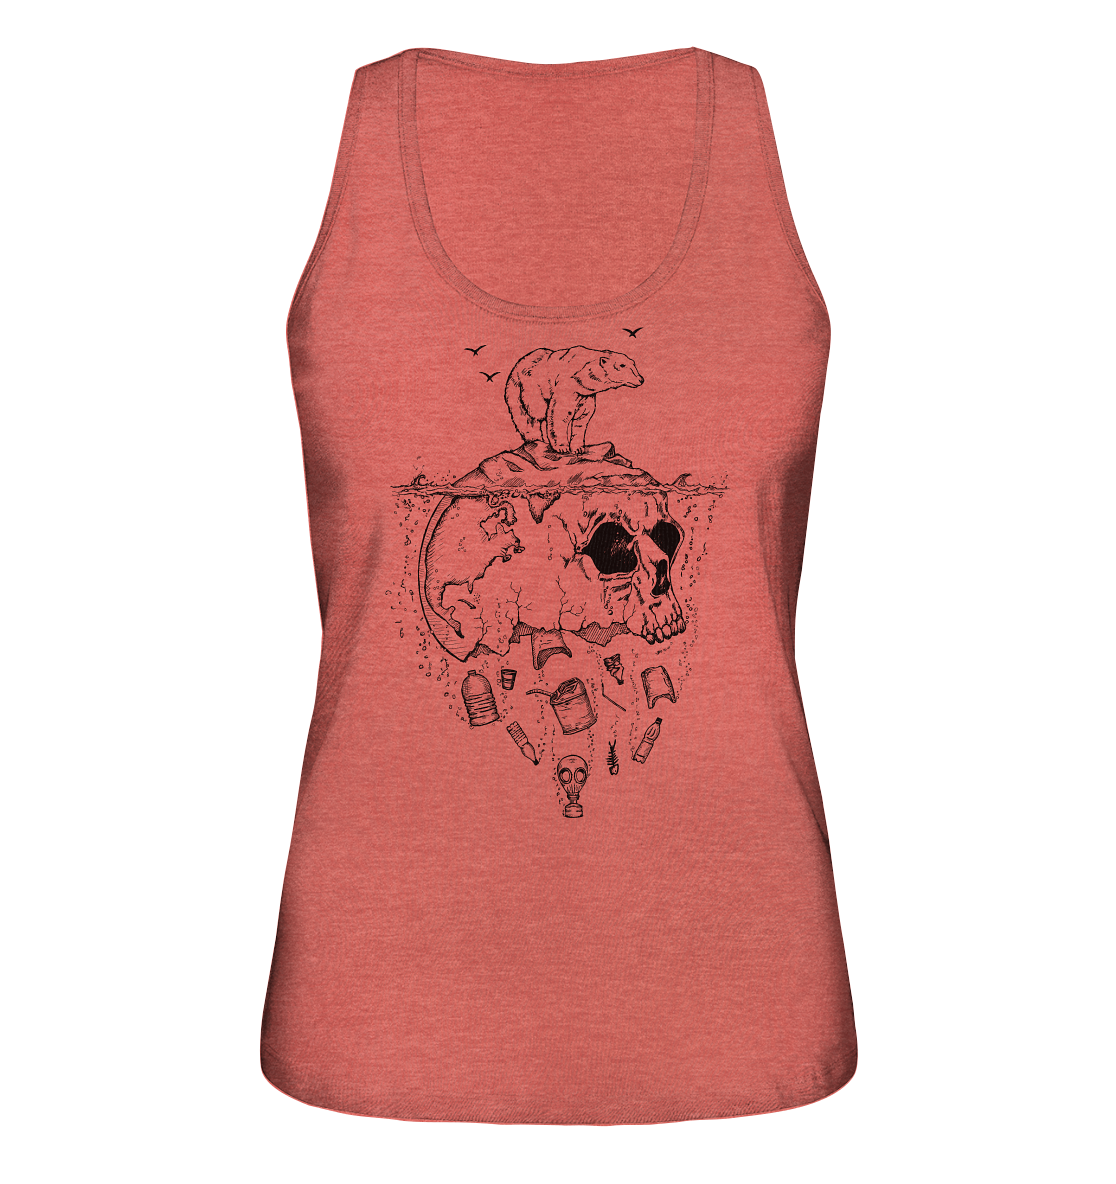 front-ladies-organic-tank-top-e05651-1116x-4.png